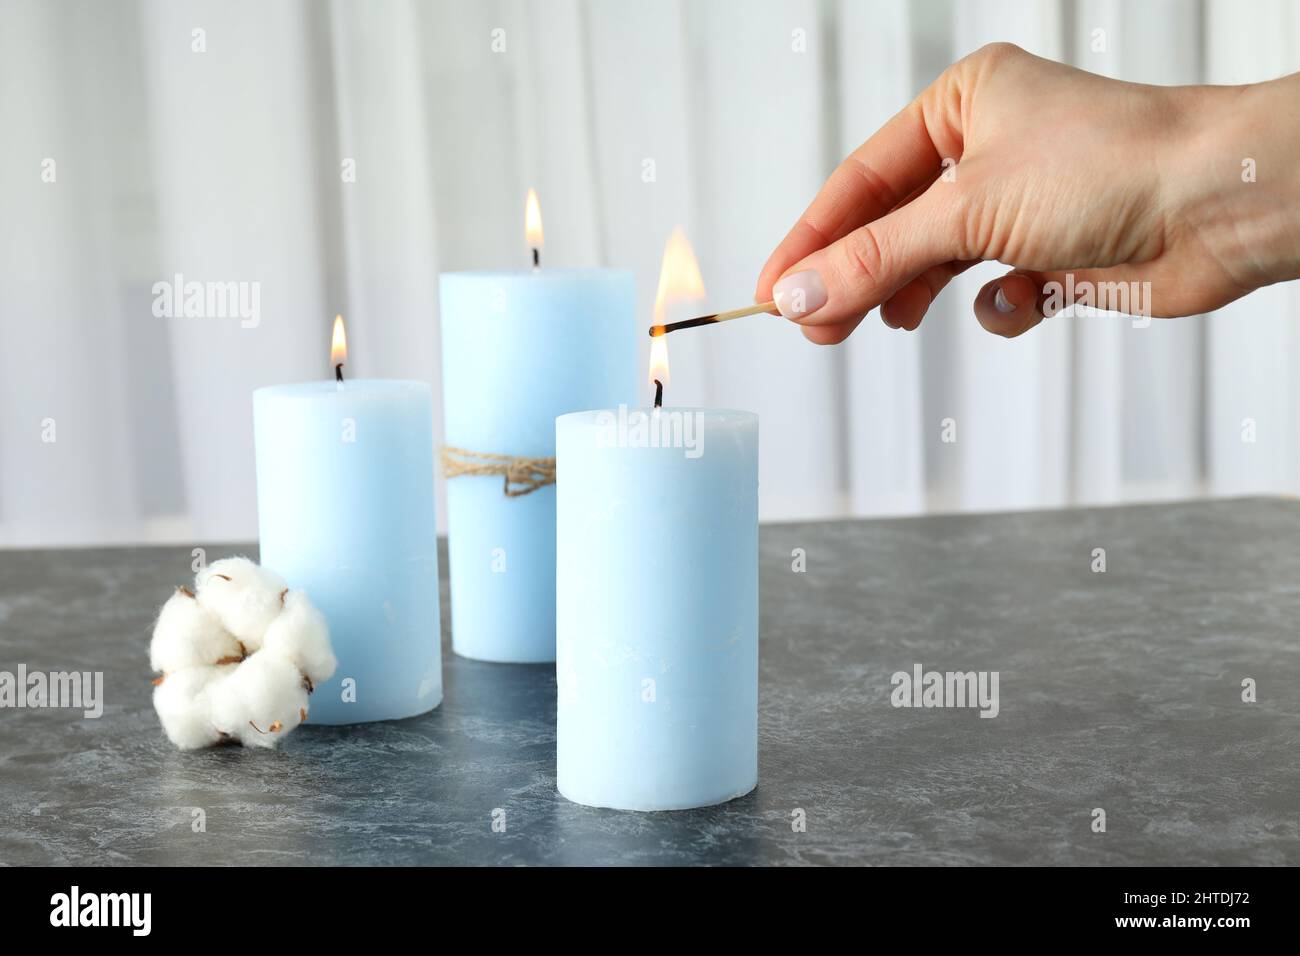 https://c8.alamy.com/comp/2HTDJ72/cozy-composition-with-scented-candles-for-relaxation-2HTDJ72.jpg